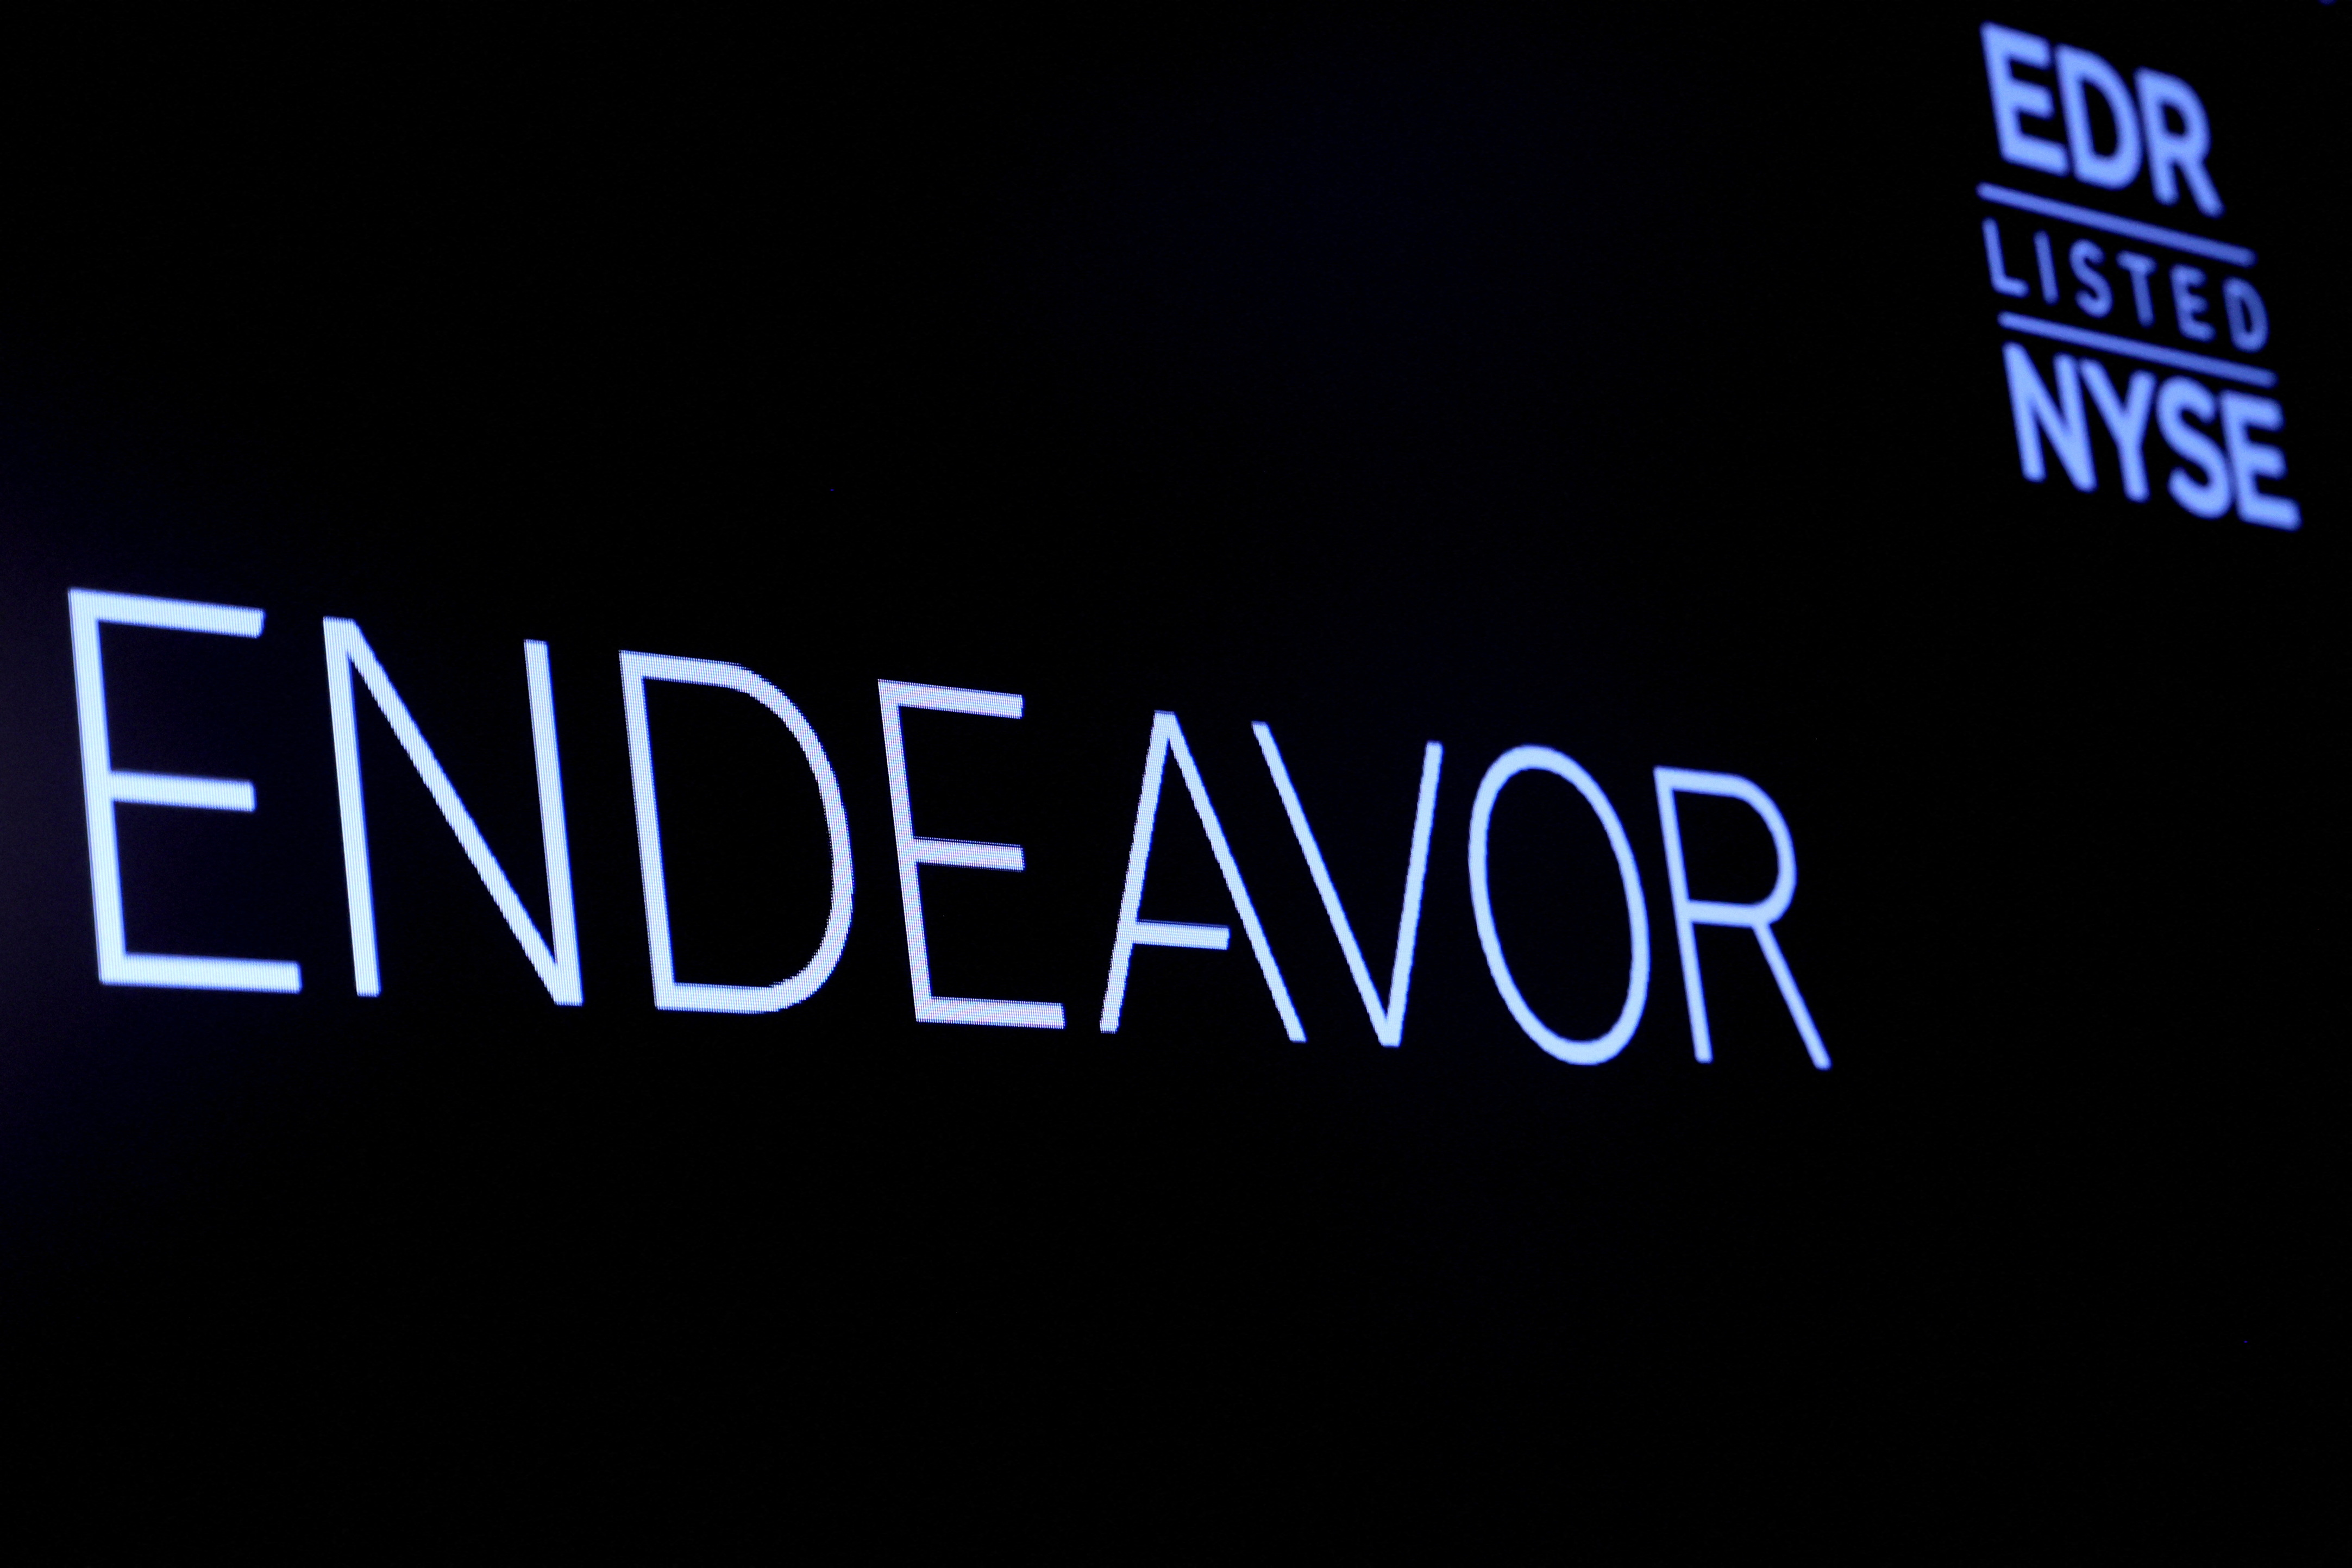 Endeavor Group Holdings logo is displayed on a screen on the floor of the NYSE in New York